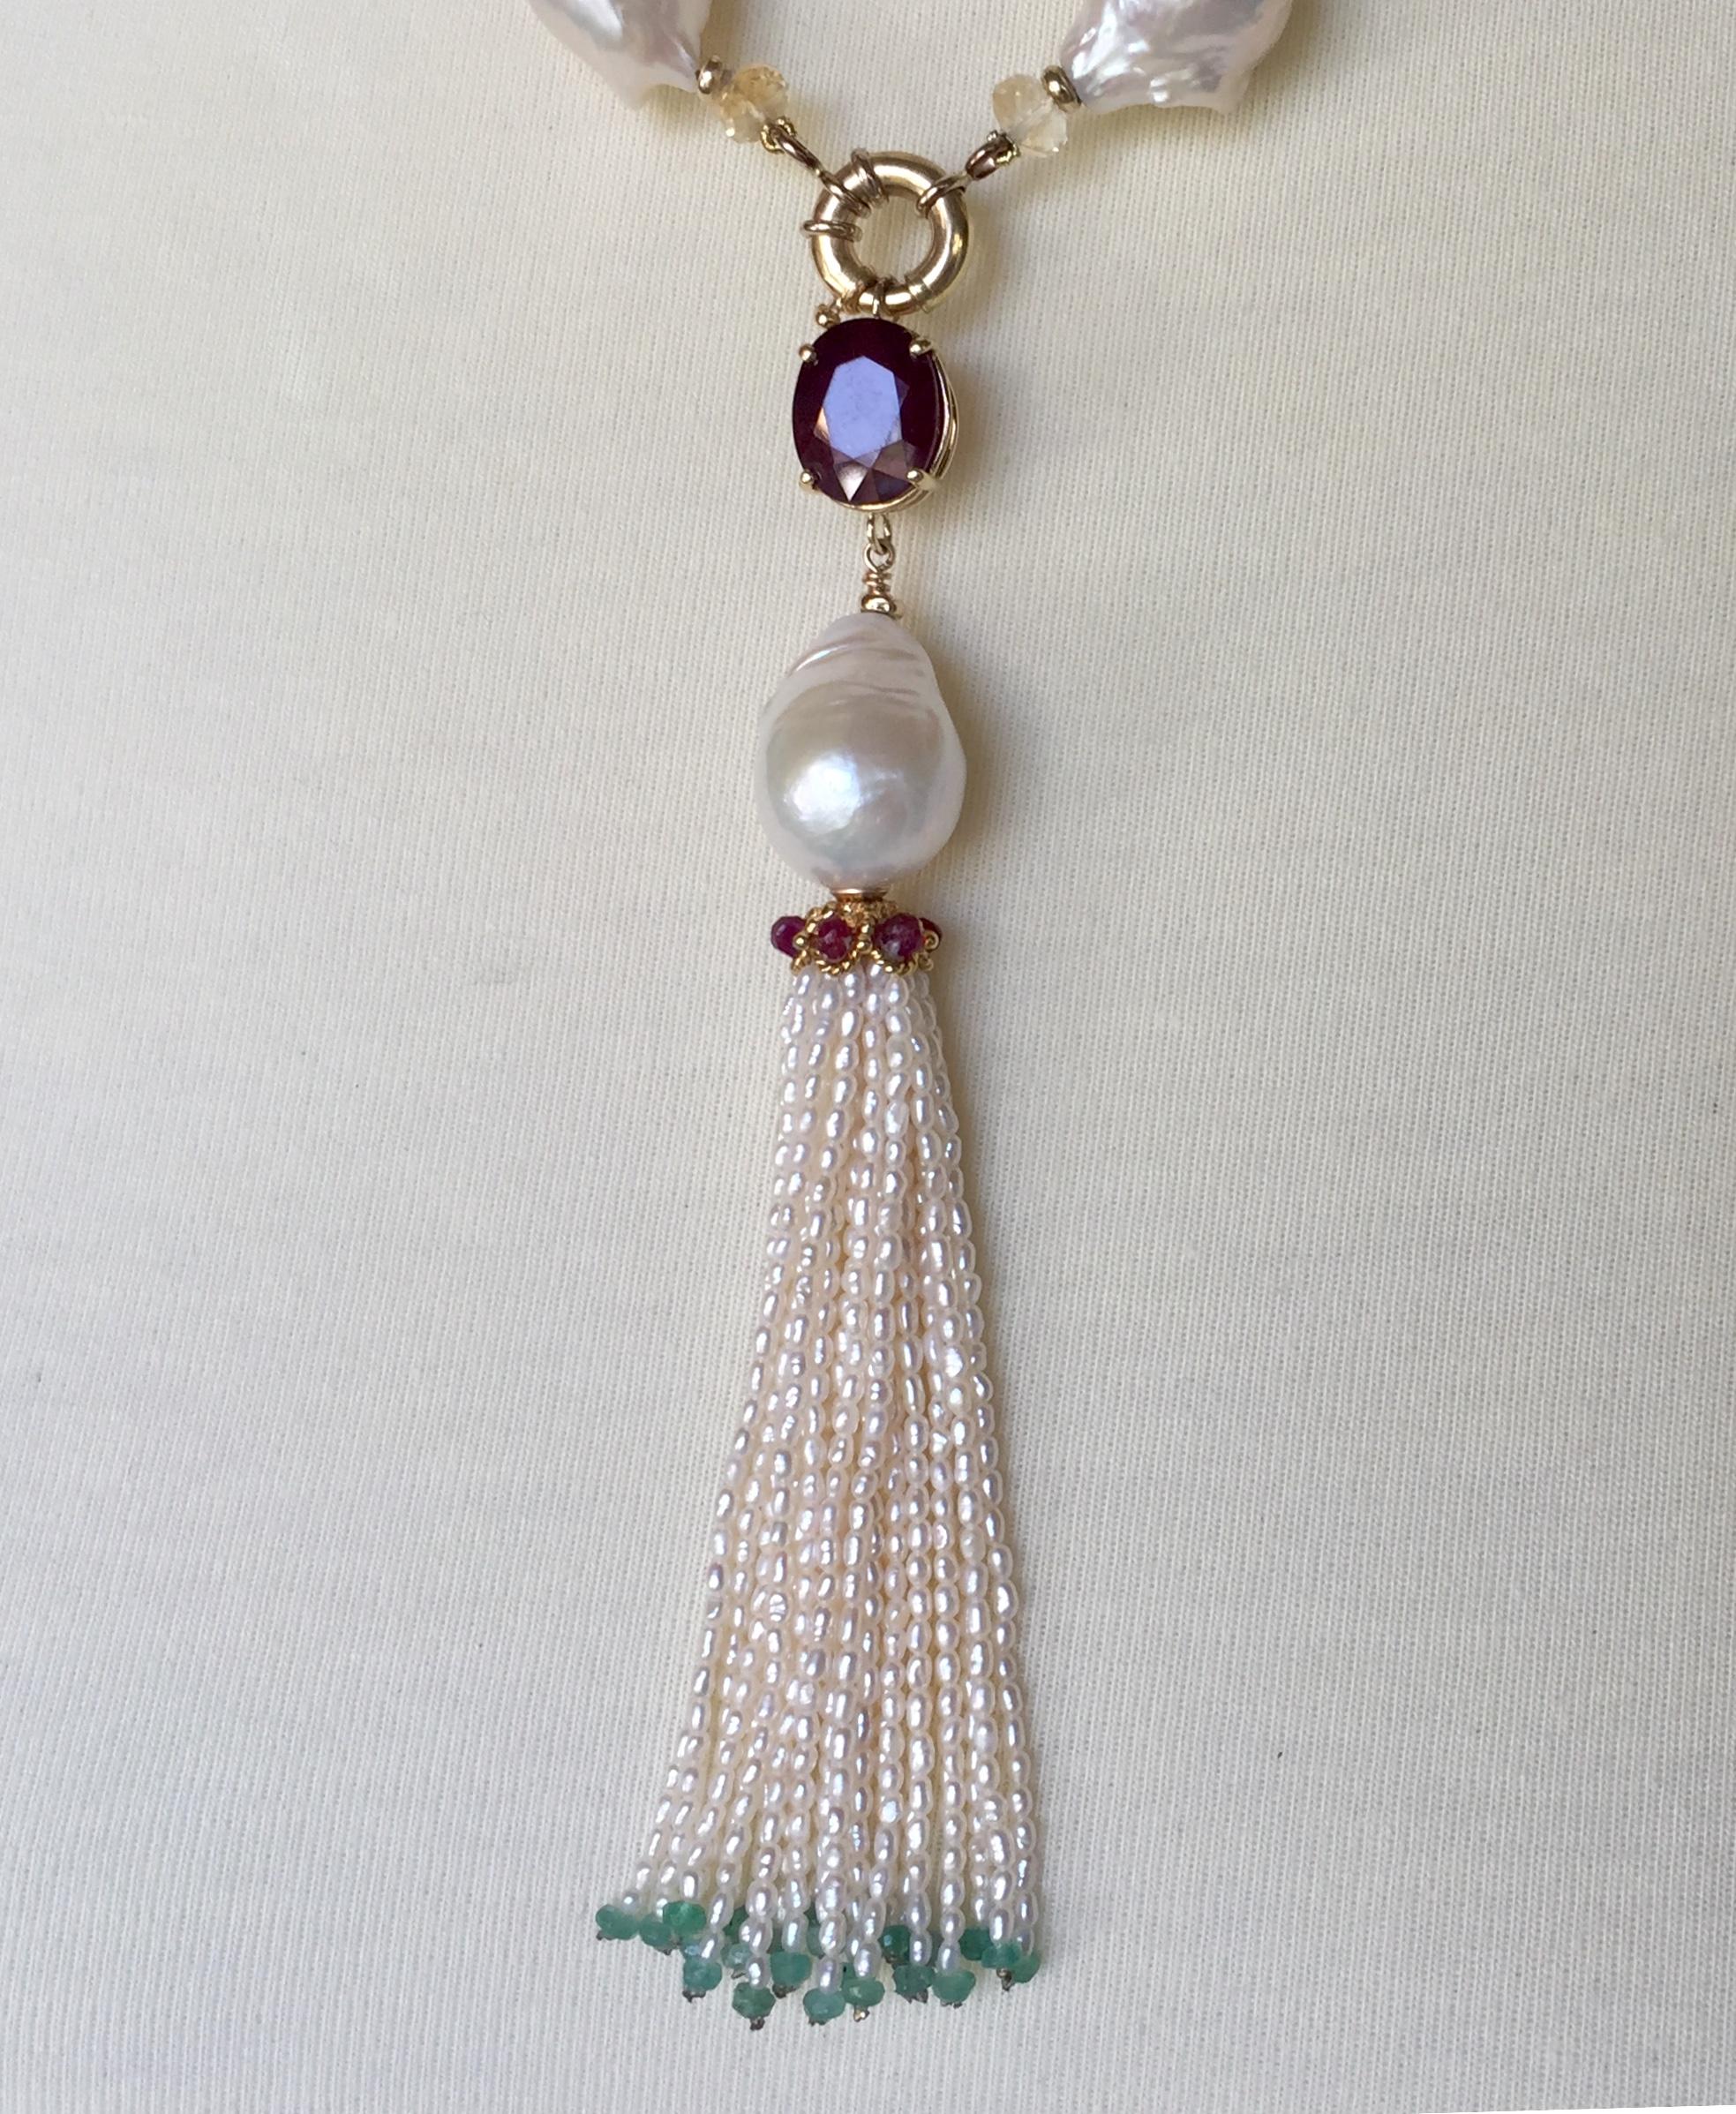 Ruby, Citrine, 14 Karat Gold, Pearl, and Apatite Sautoir Necklace with Tassel im Zustand „Neu“ in Los Angeles, CA